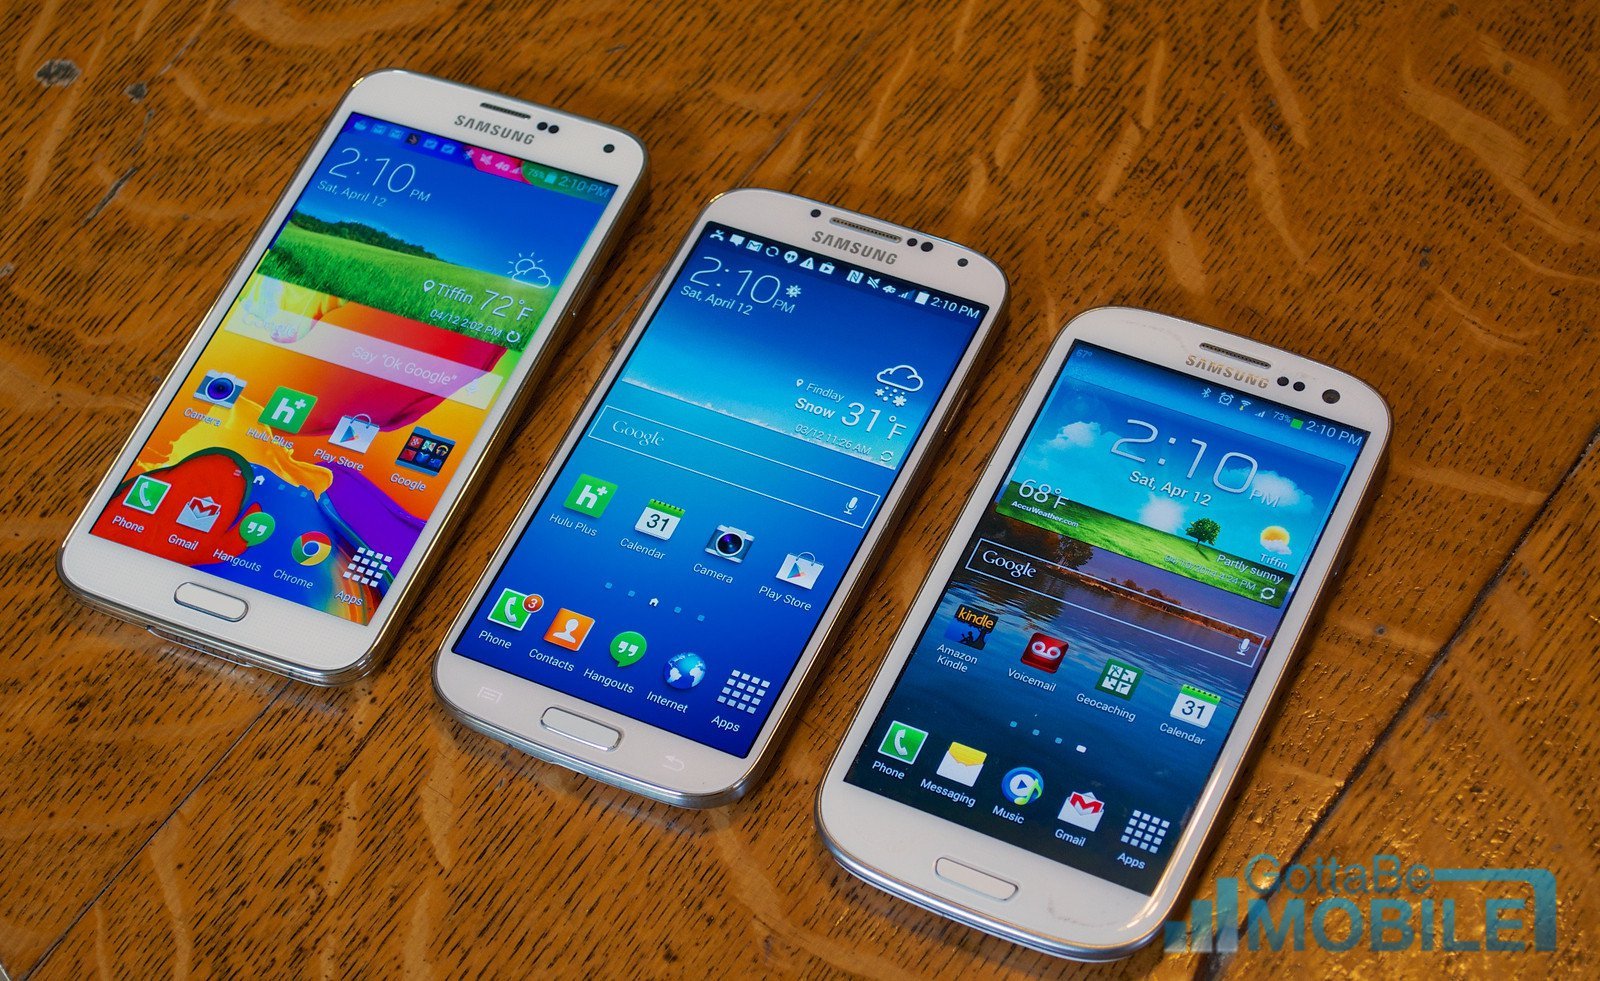 Upgrading from the Galaxy S4 to the Galaxy S6 will bring a lot of change.